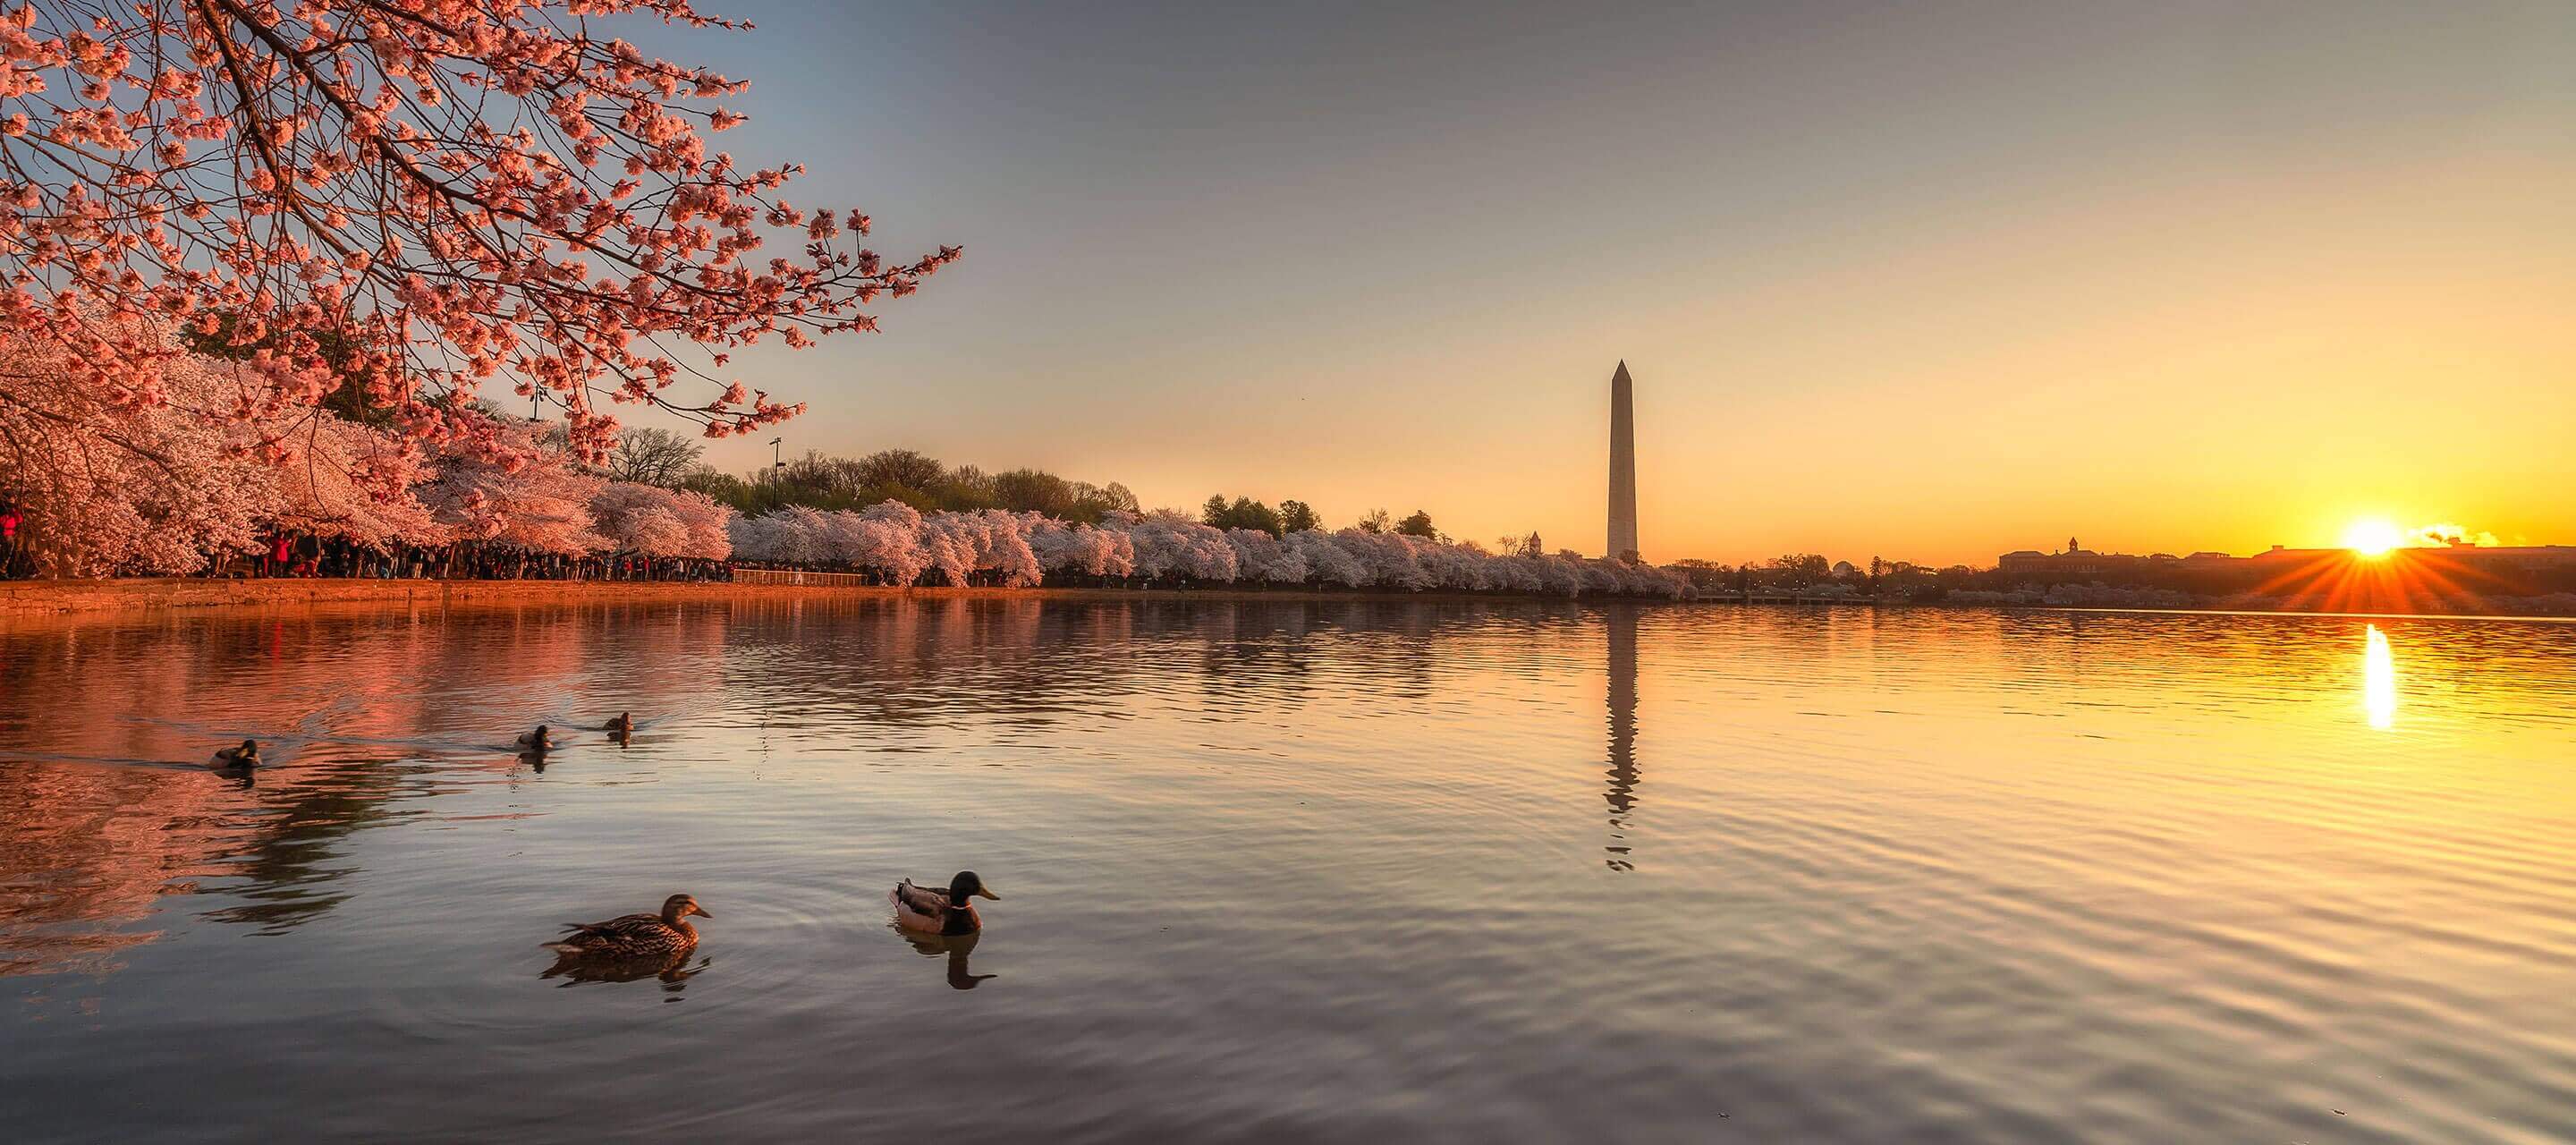 Washington monument and cherry blossoms near body of water.